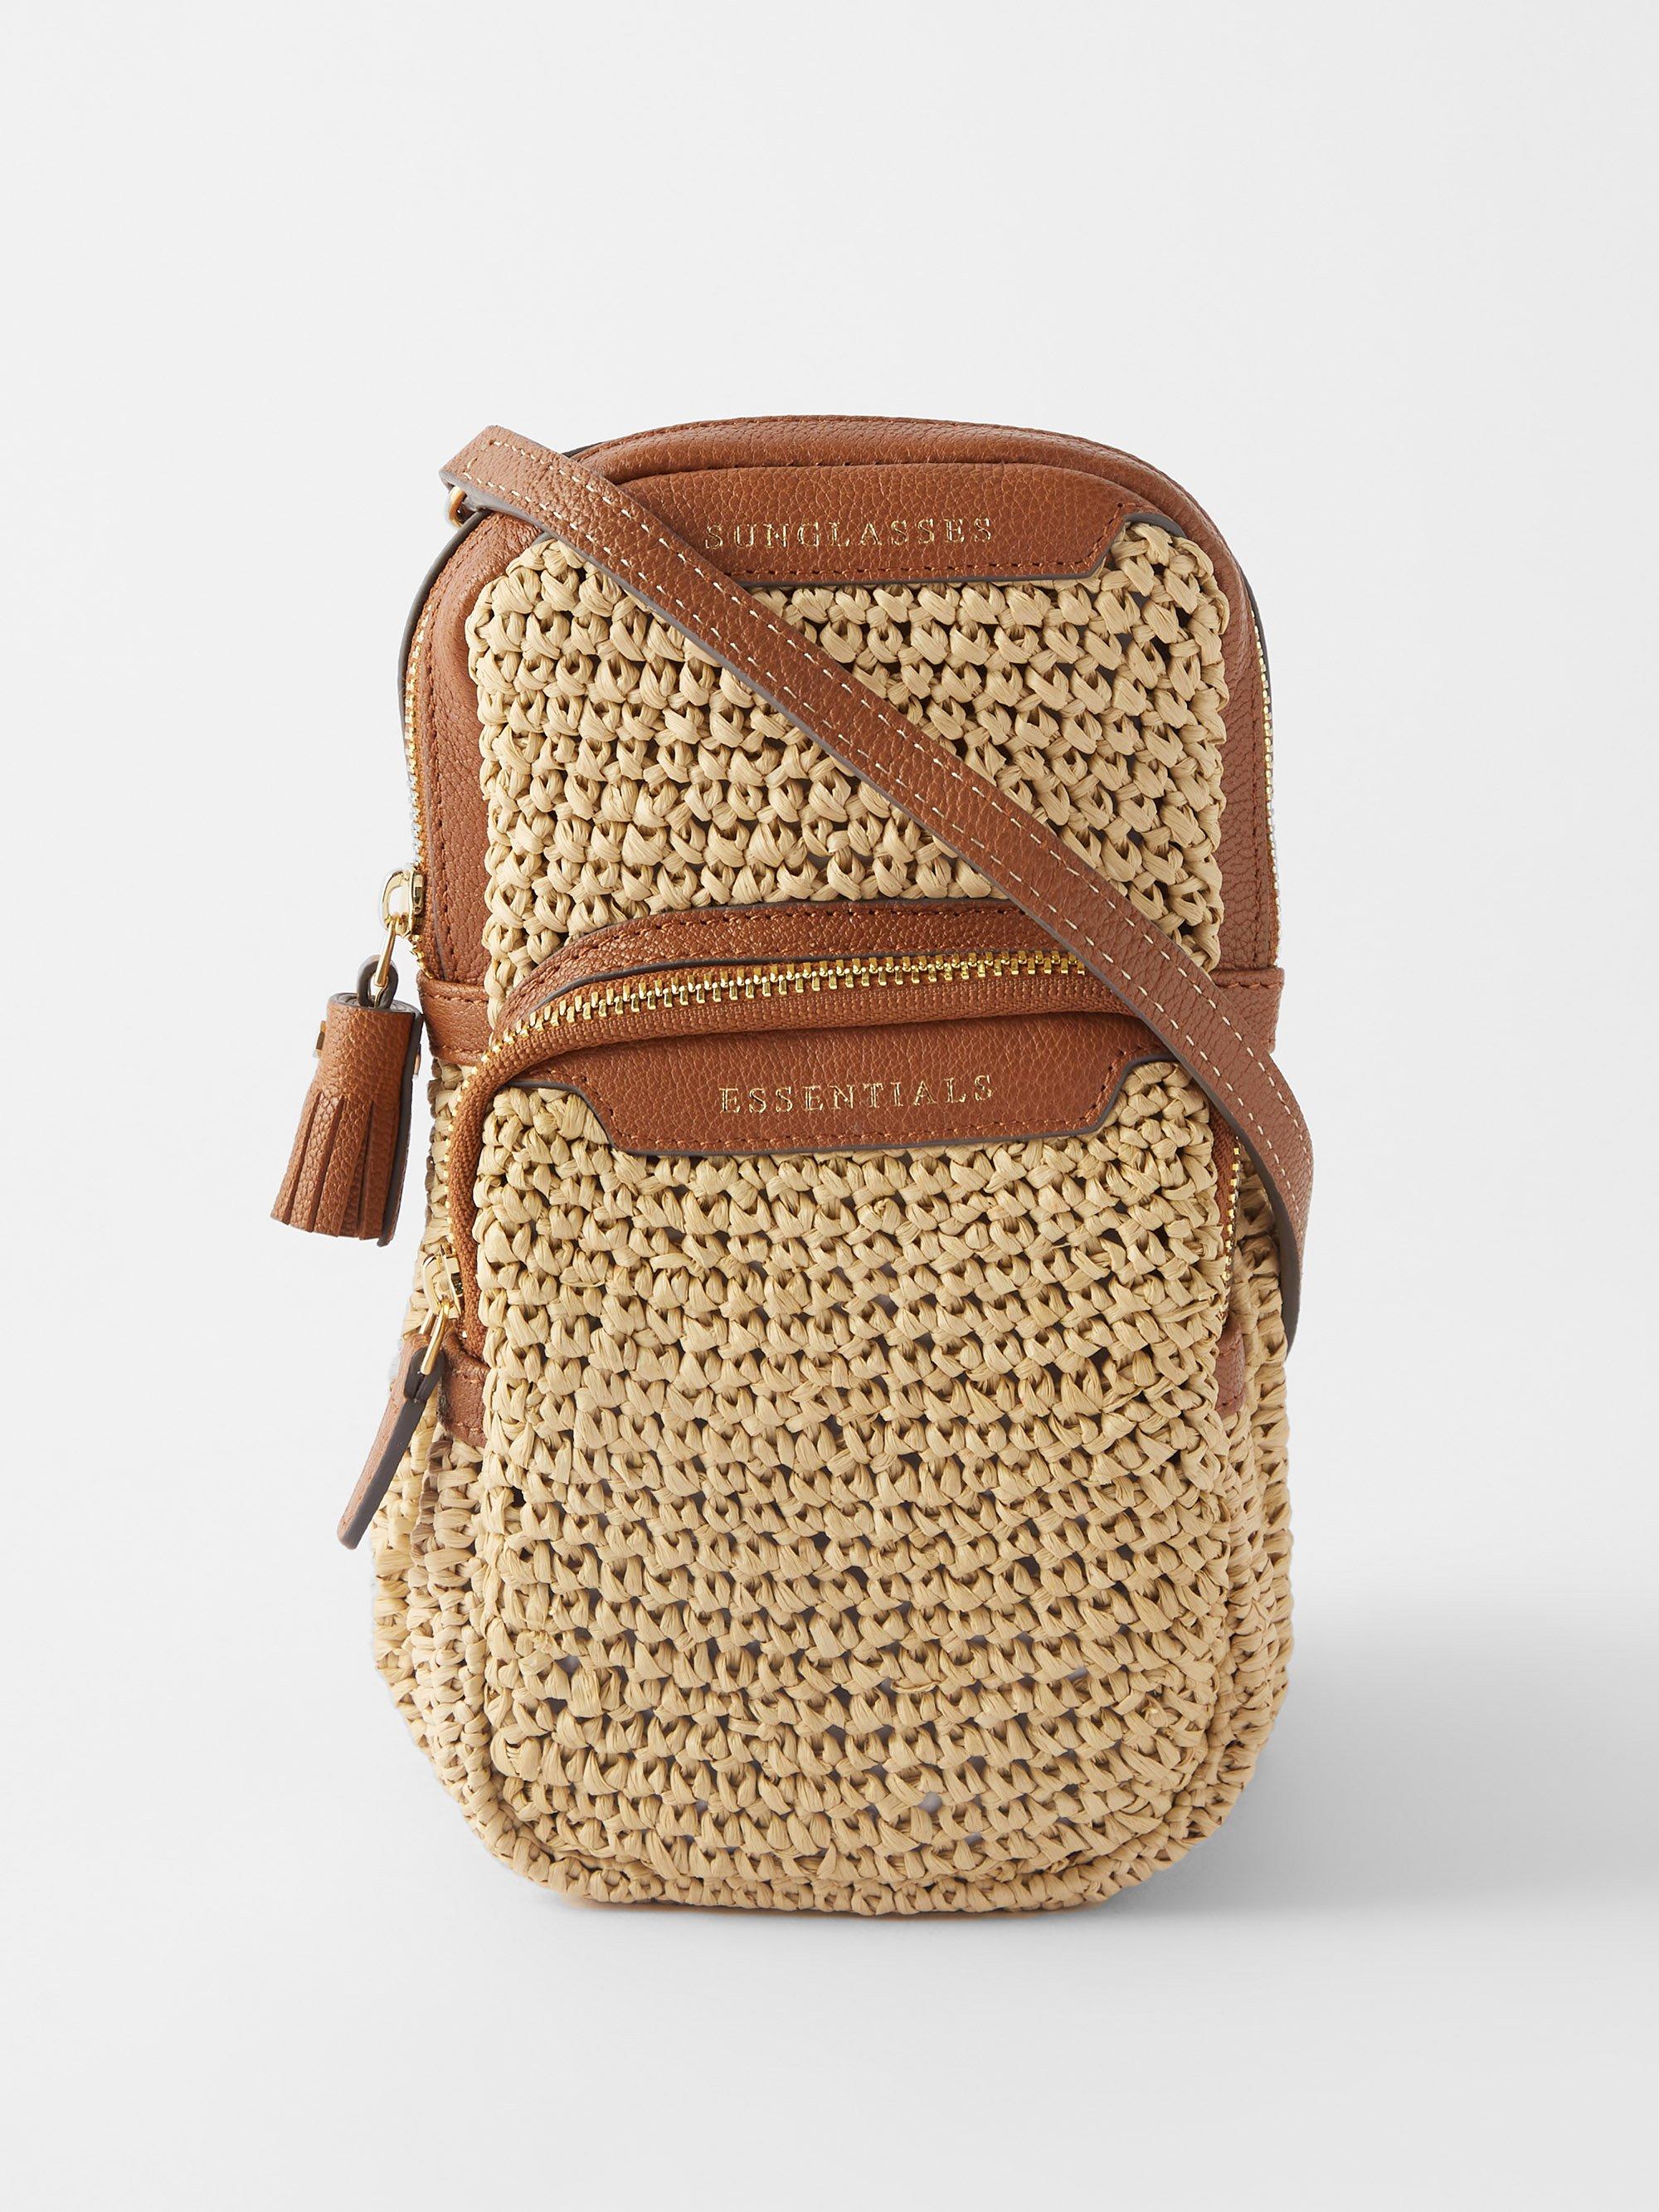 Anya Hindmarch Essentials Raffia And Leather Cross-body Bag in Natural ...